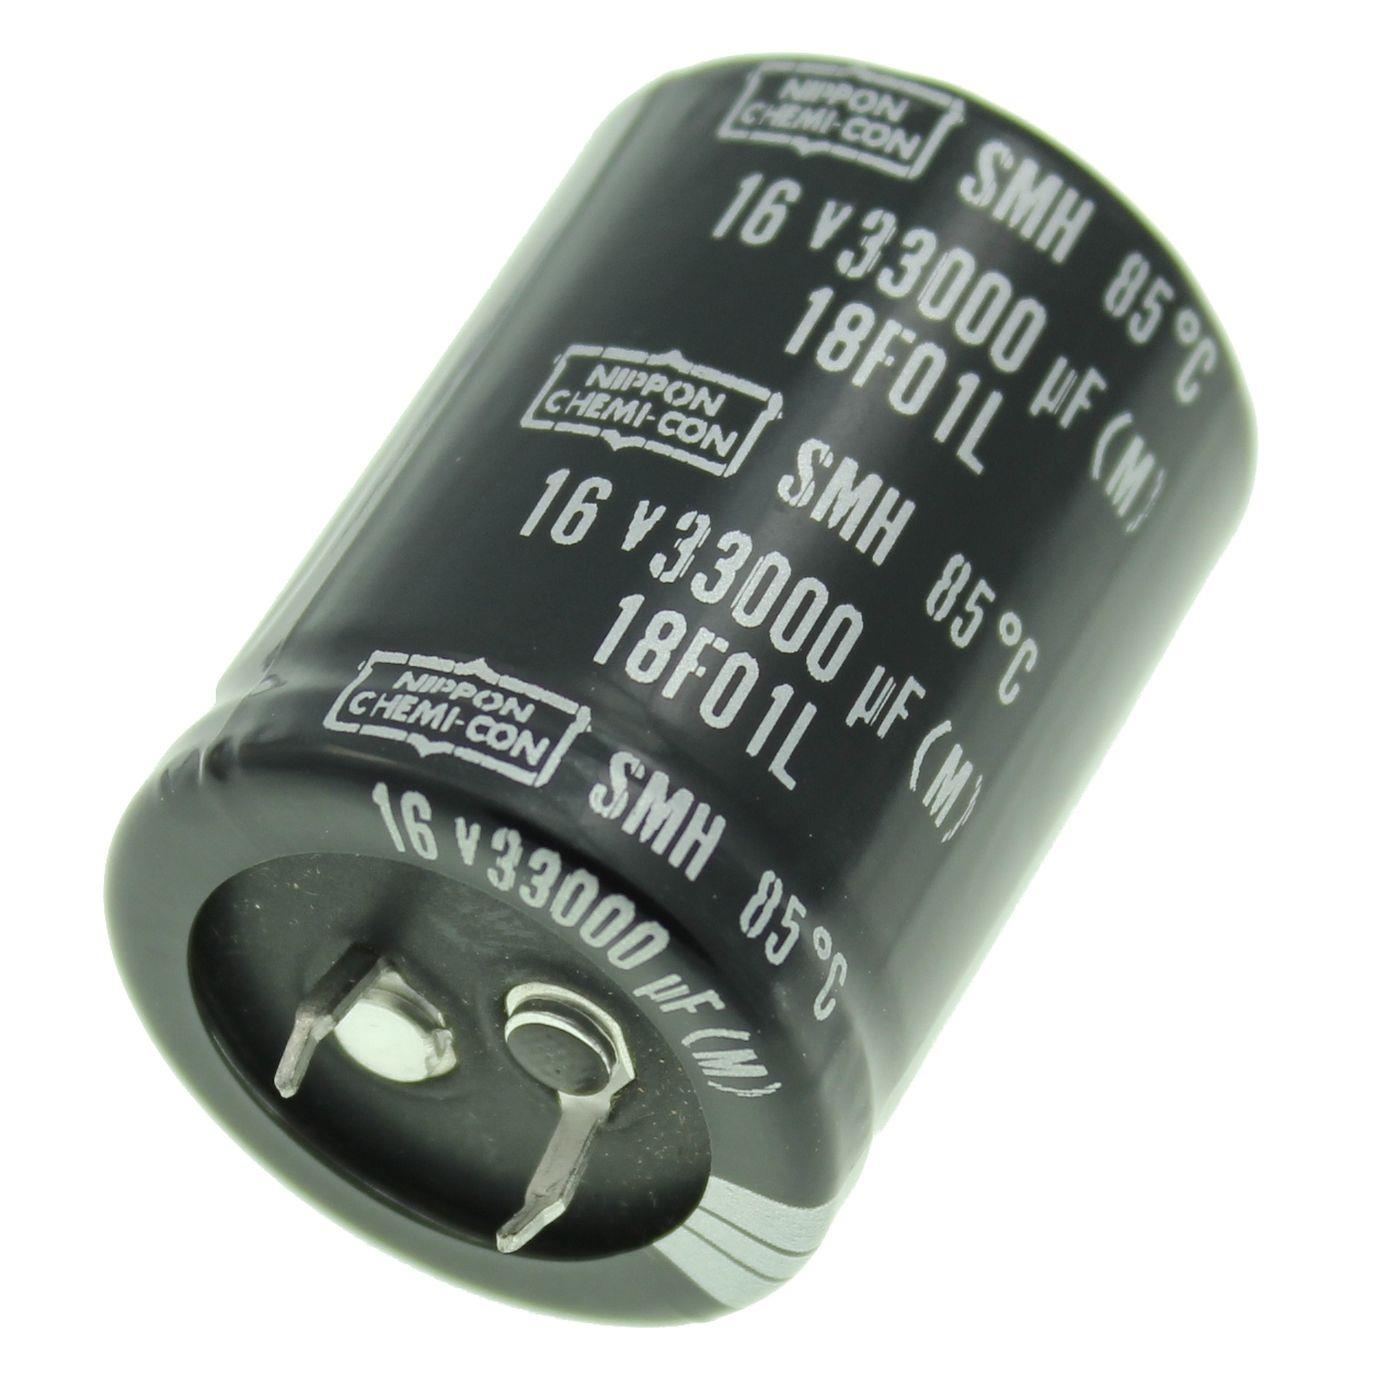 Snap-In Electrolytic capacitor Radial 33000µF 16V 85°C SMH16VN333M30X40T2 d30x40mm 33000uF